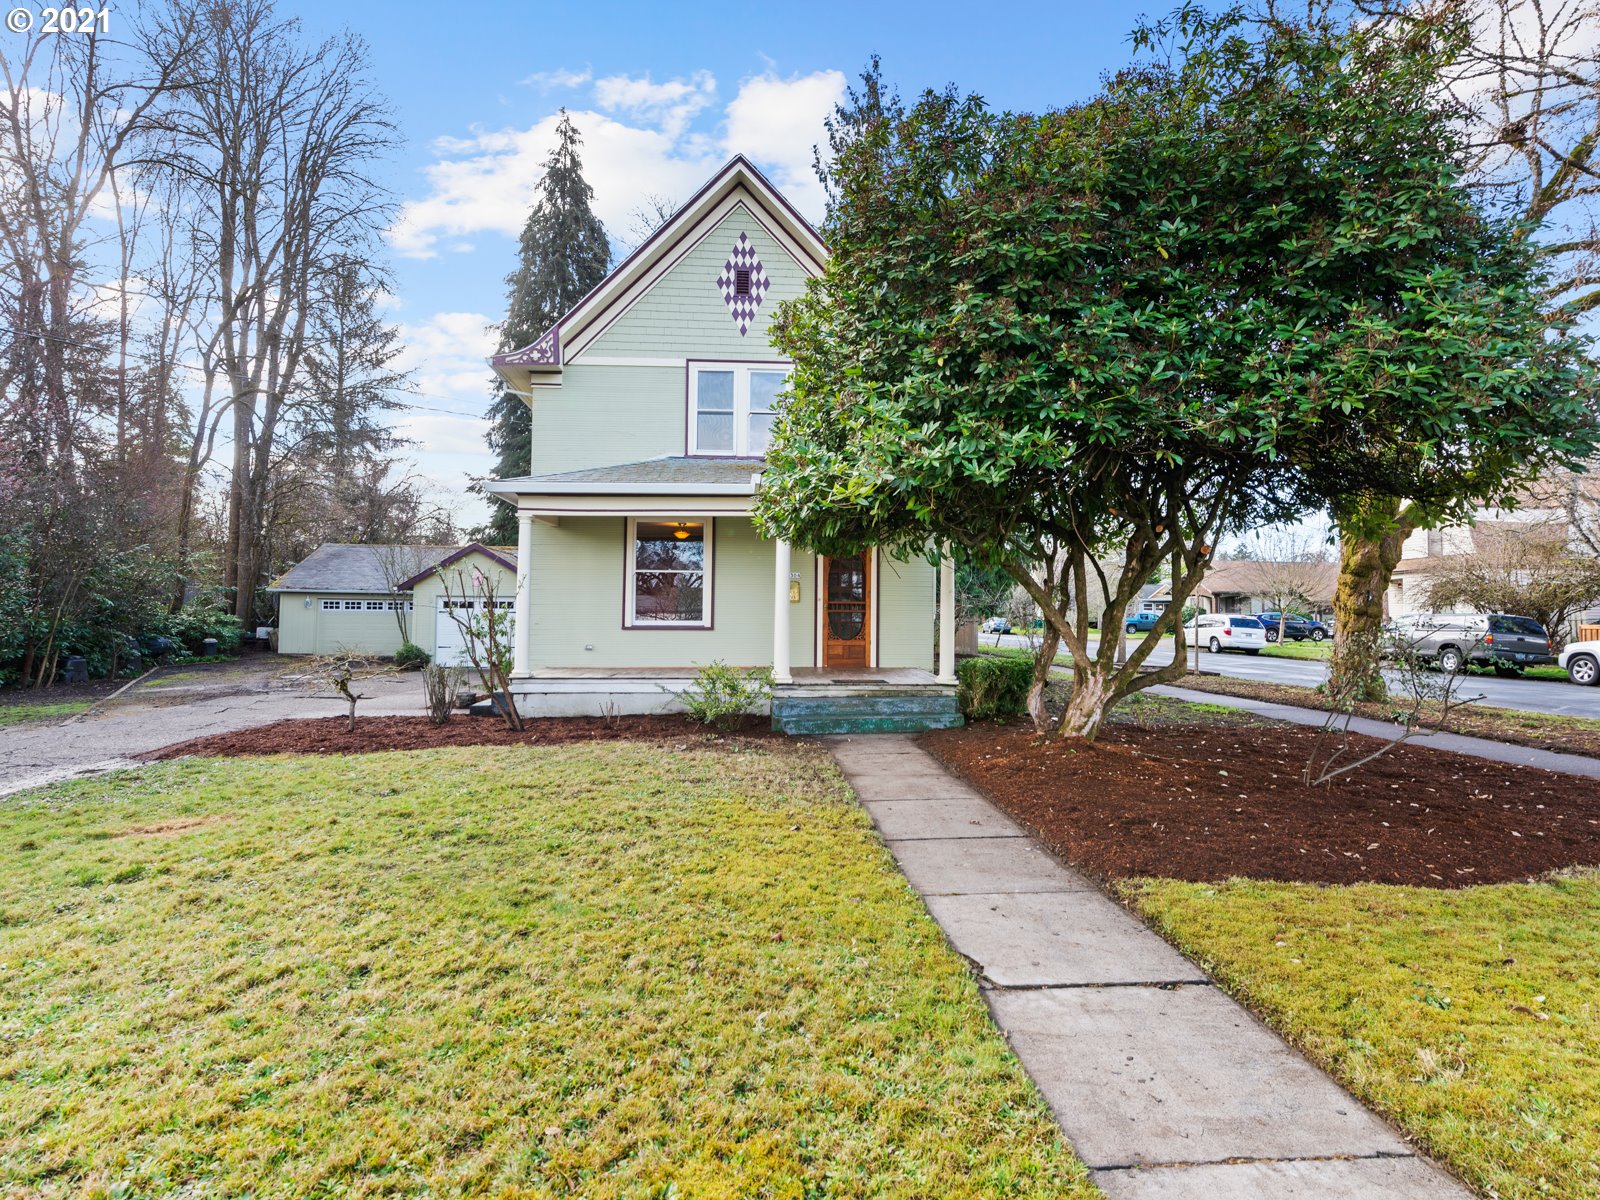 2304 17TH AVE (1 of 31)